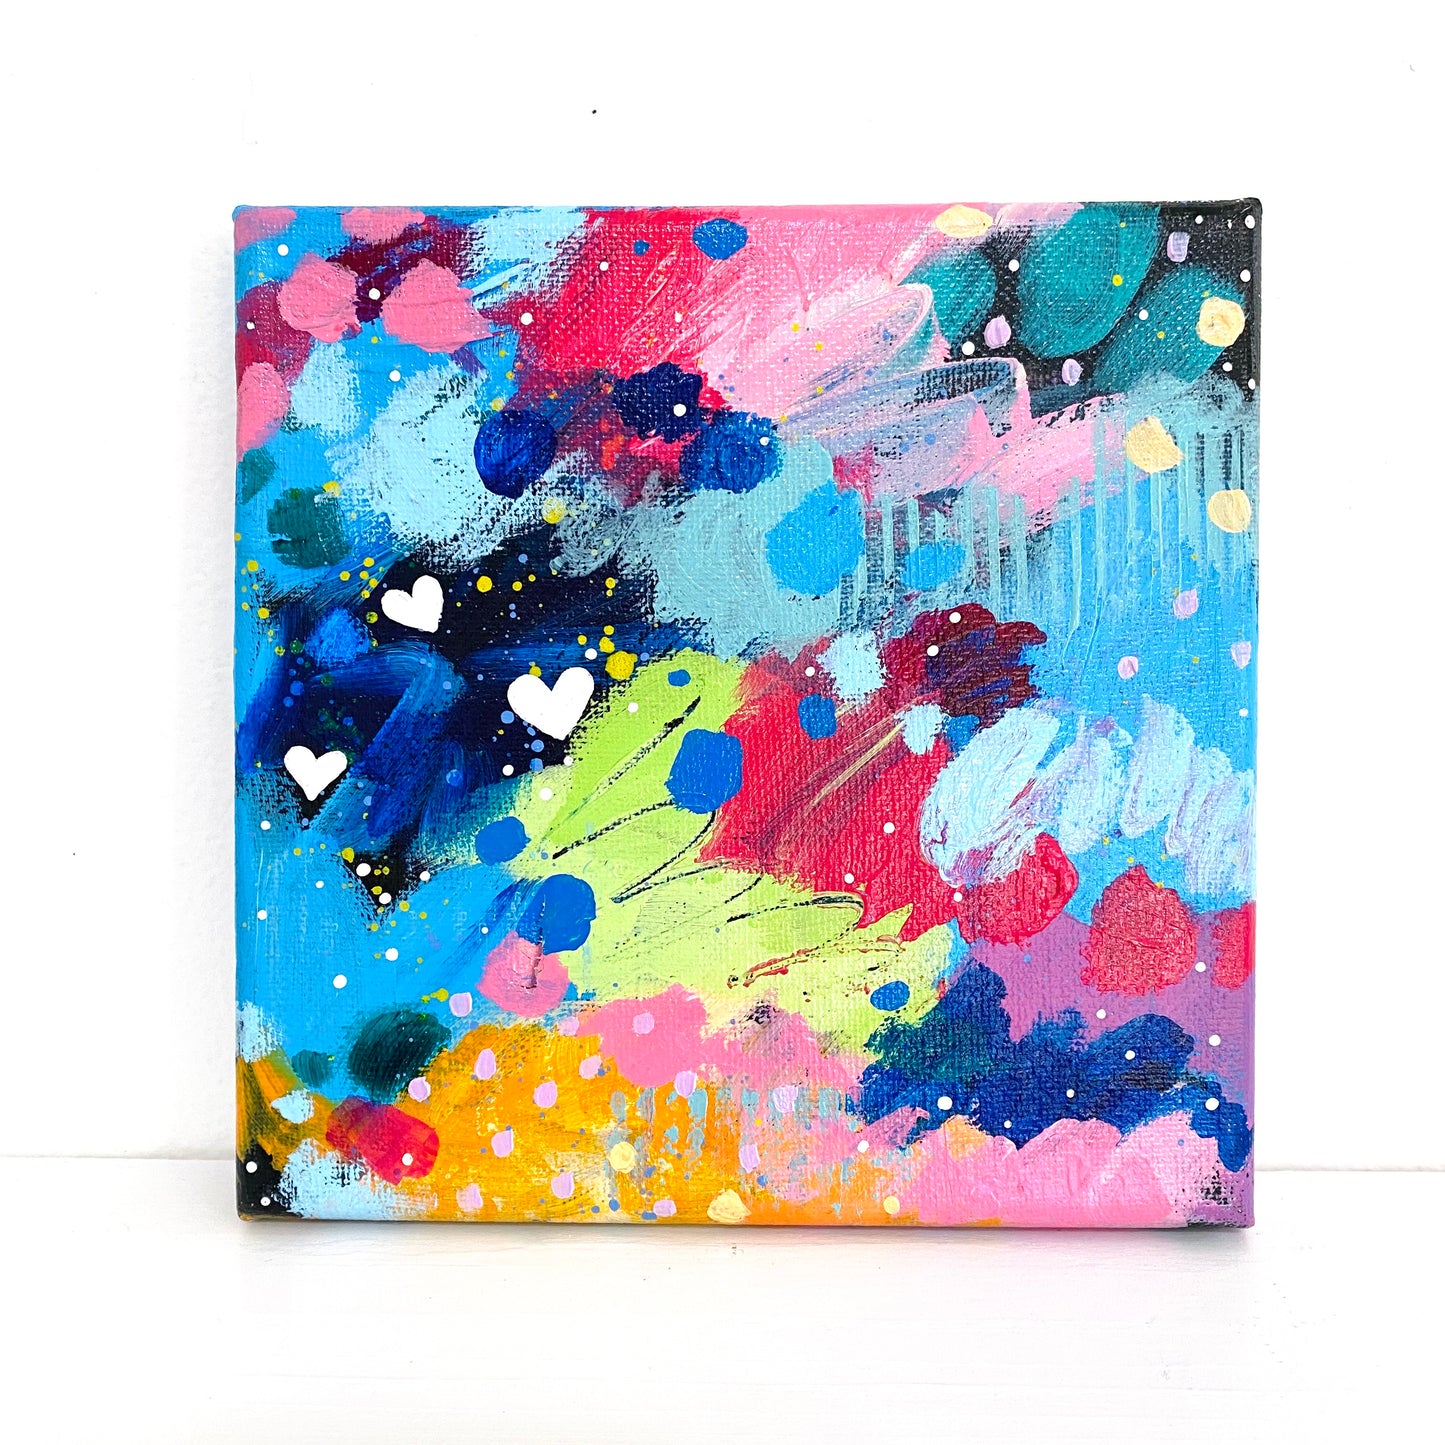 Little Hearts #5 6x6 inch abstract original canvas